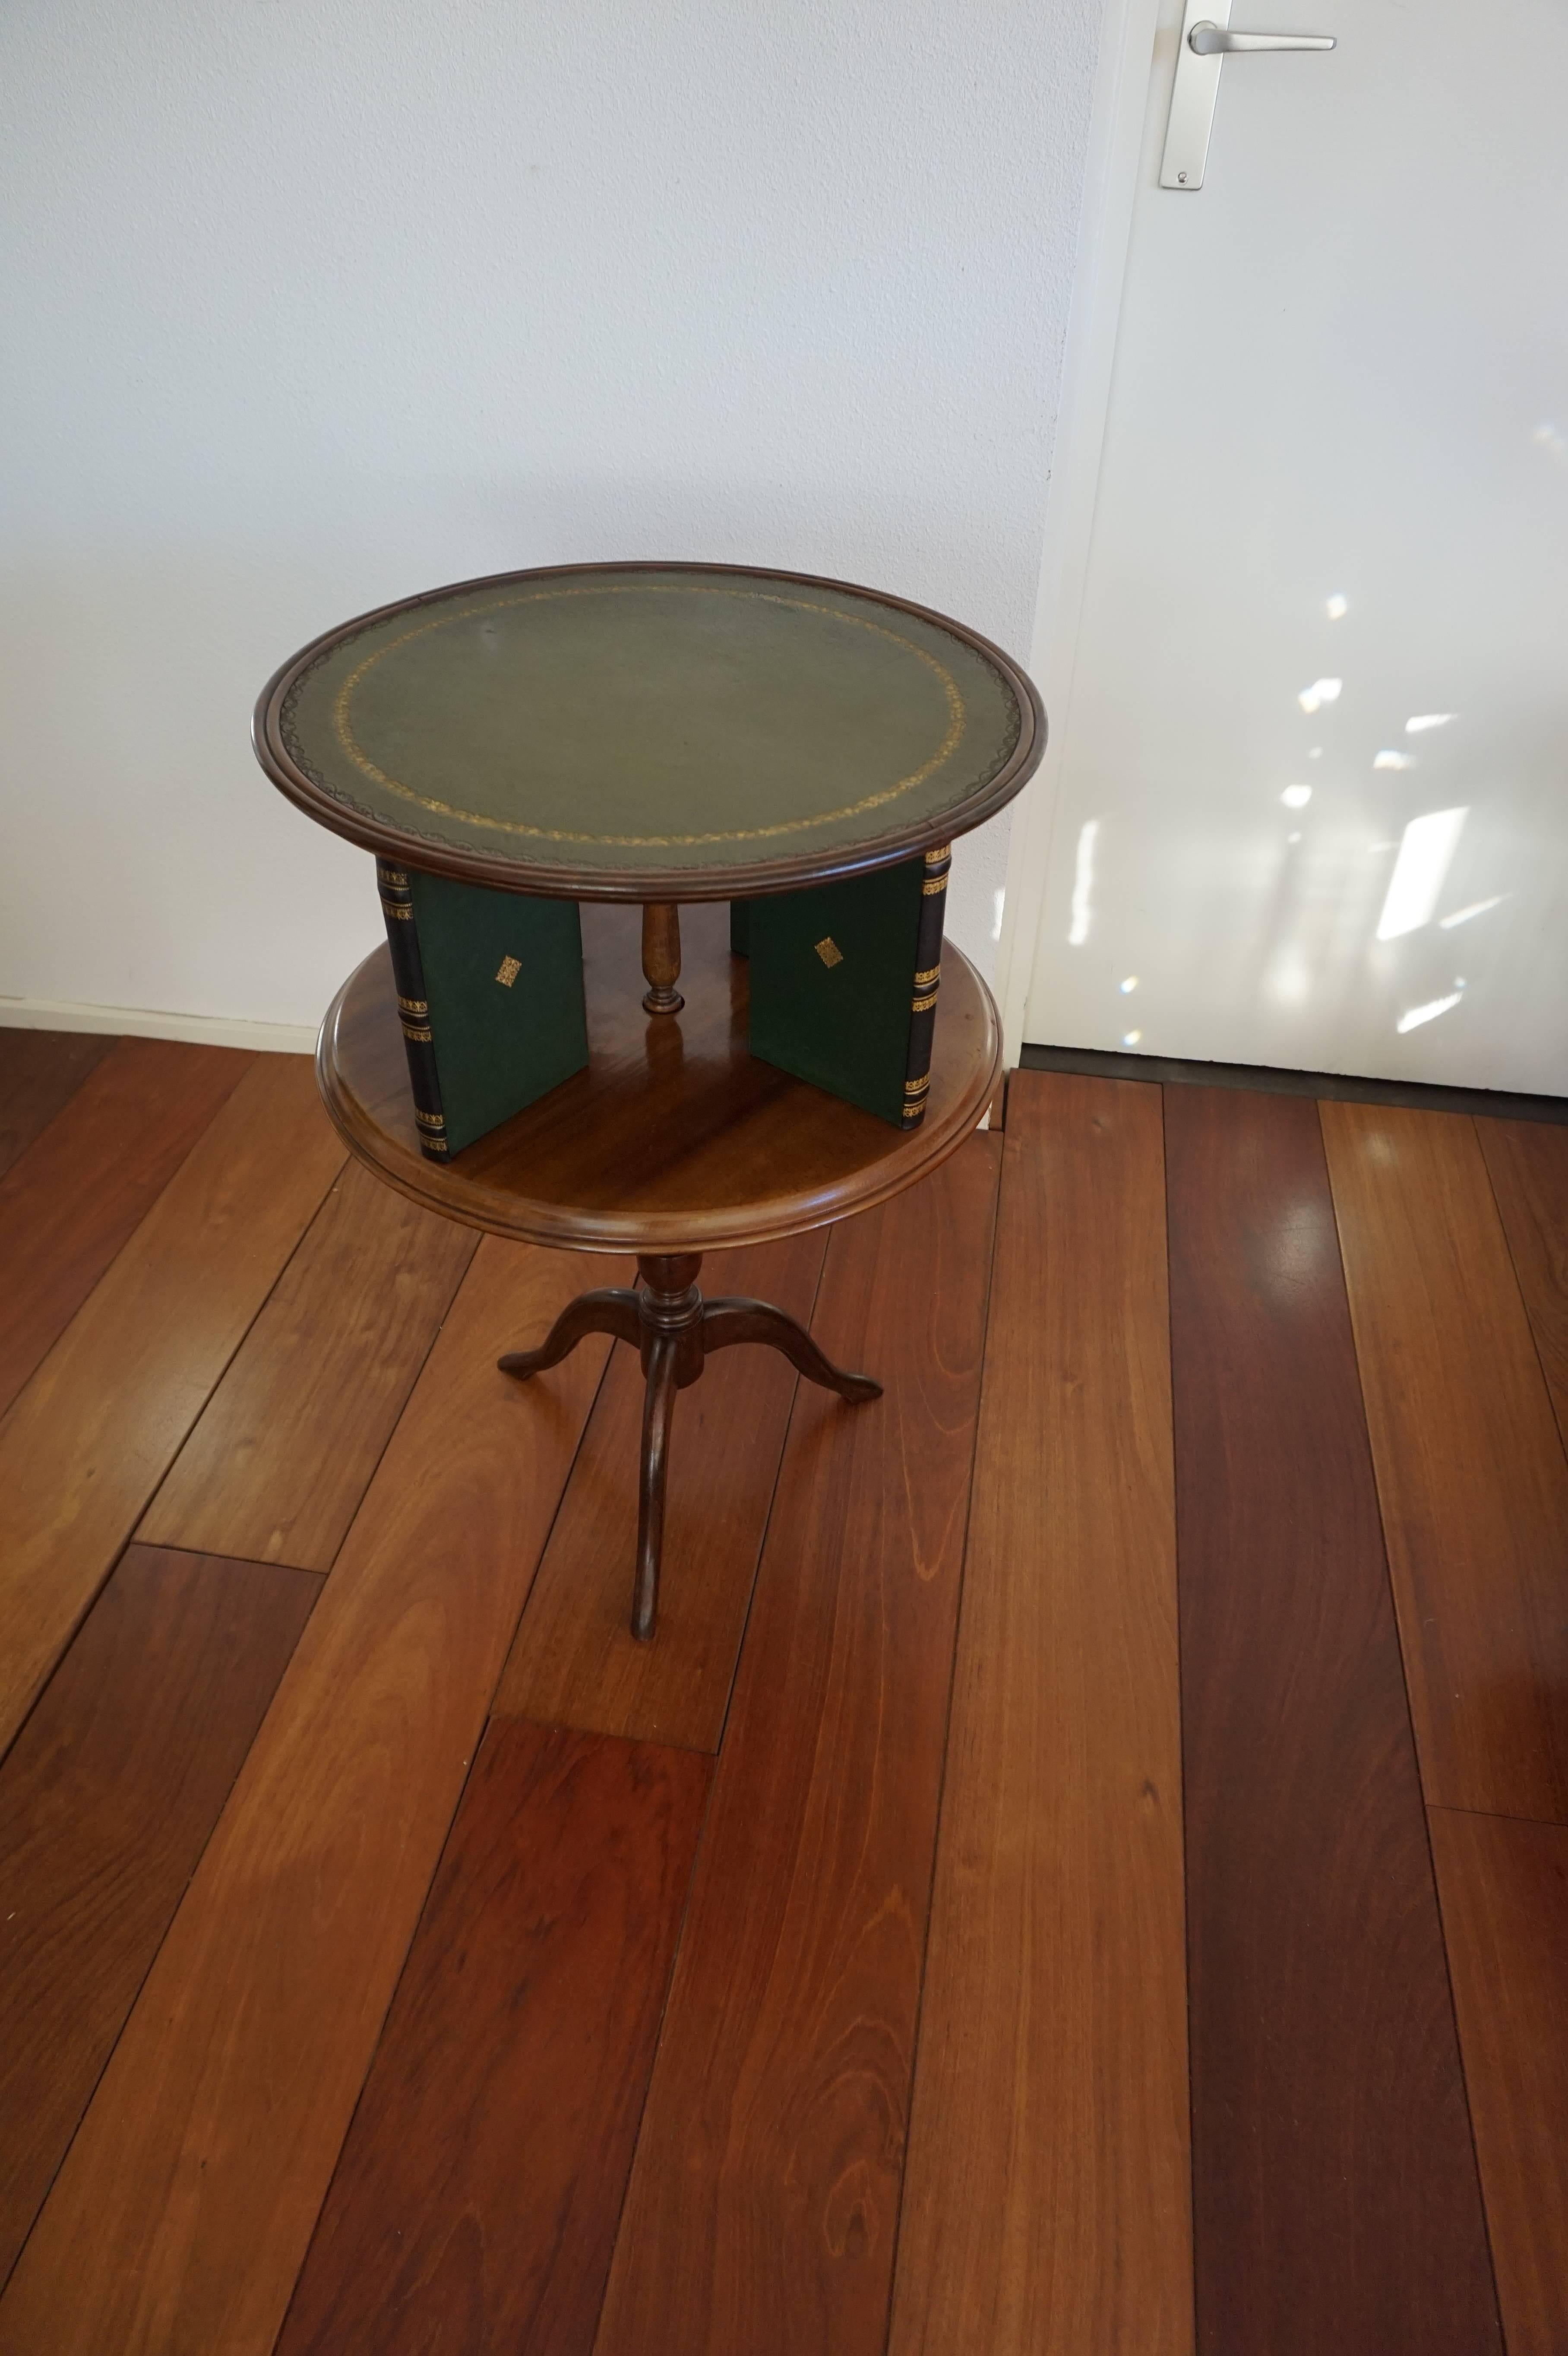 Stylish and practical books table with inlaid leather top.

This rare shape and highly stylish table is both a revolving bookcase and an occasional table. It can be used as a revolving bookcase with only a vase or a lamp on top, but one could also